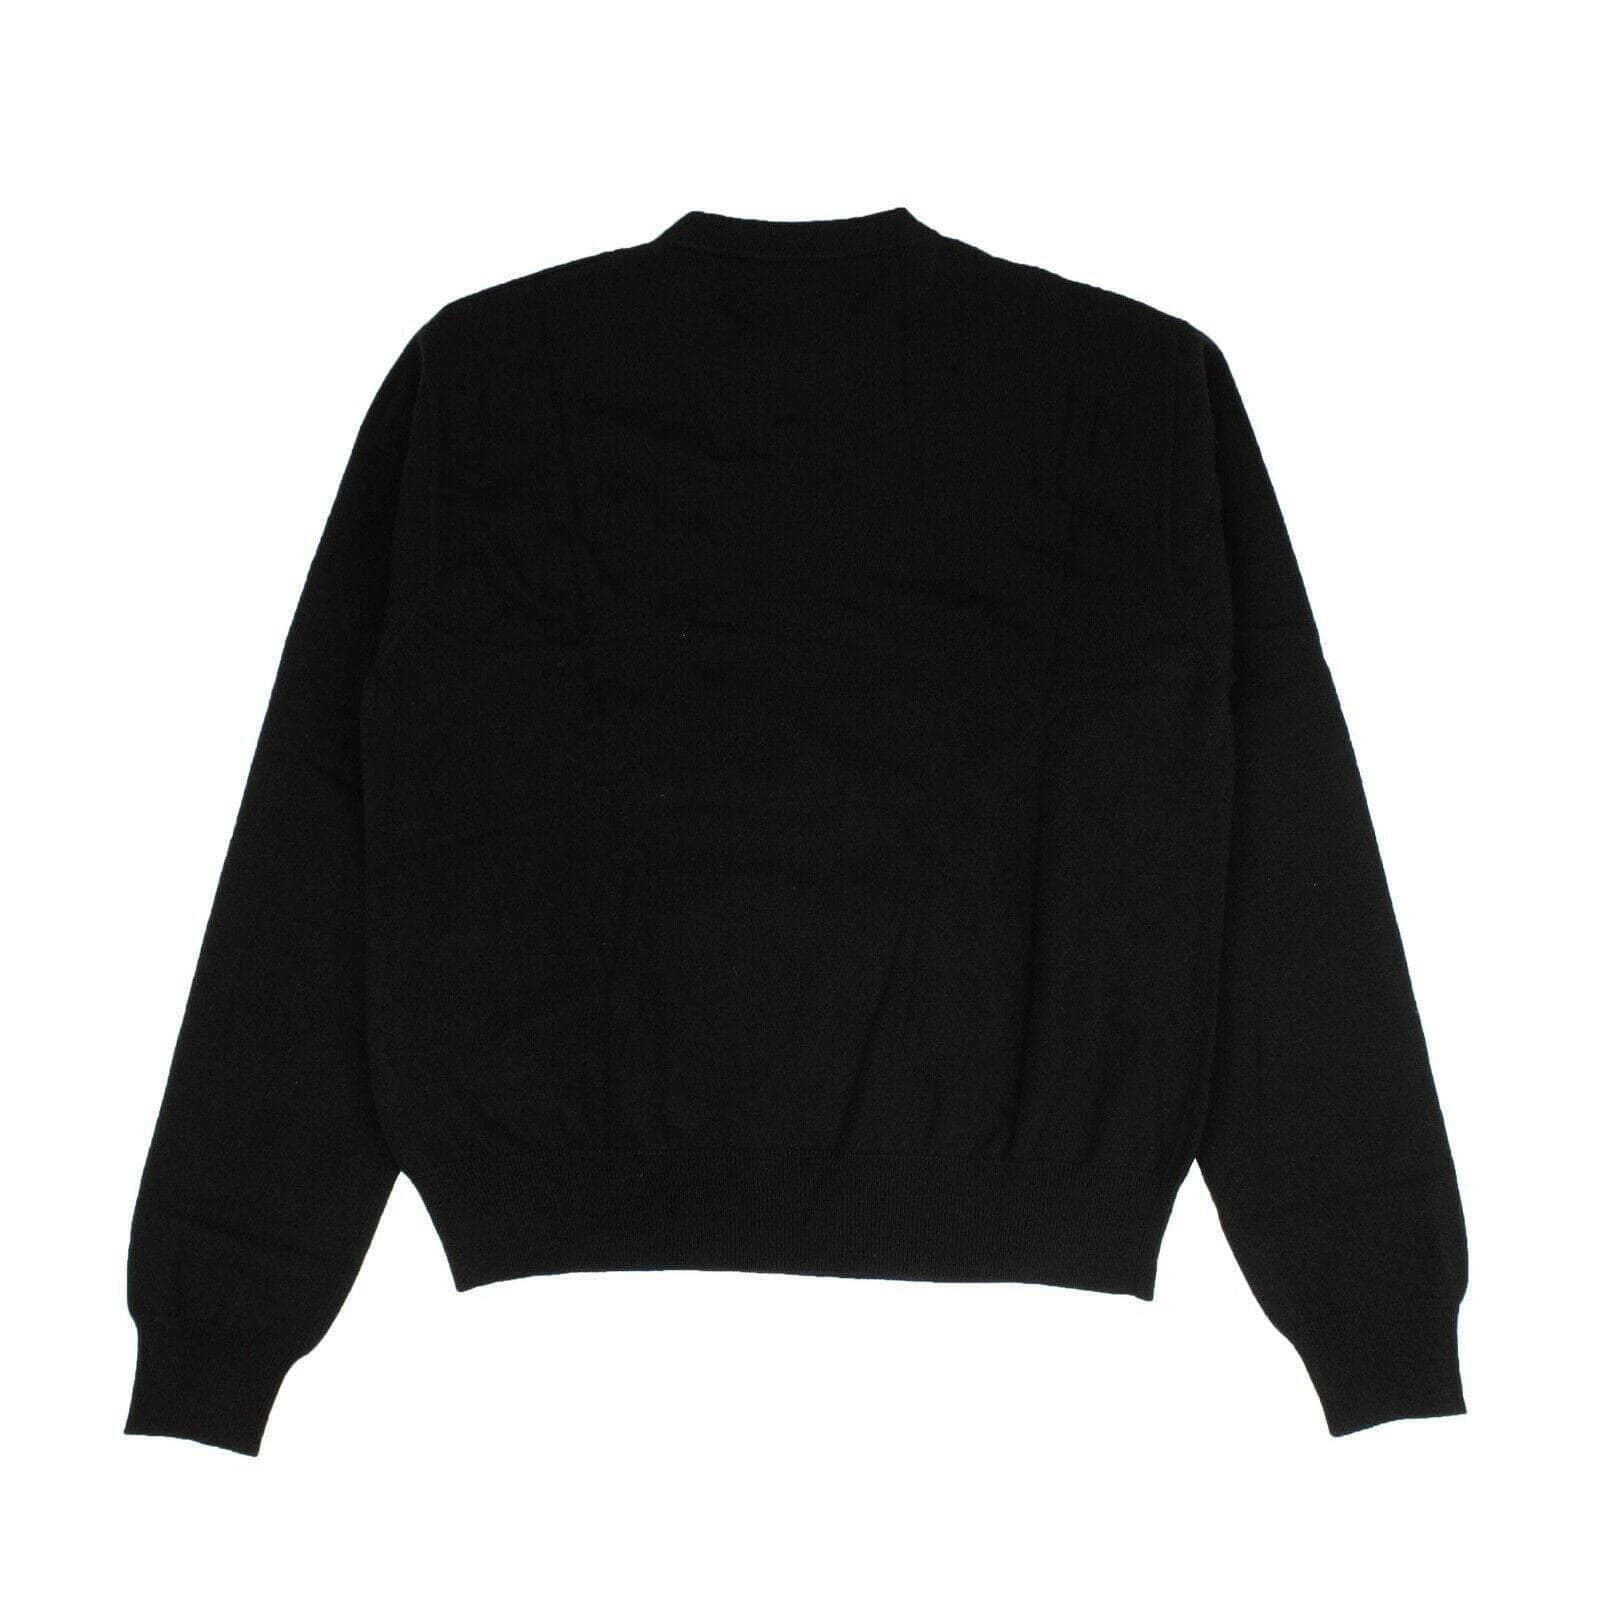 424 ON FAIRFAX 424-on-fairfax, 500-750, channelenable-all, chicmi, couponcollection, gender-mens, main-clothing, mens-pullover-sweaters, size-l, size-m, size-s, size-xl Black People Fear Cops Sweater